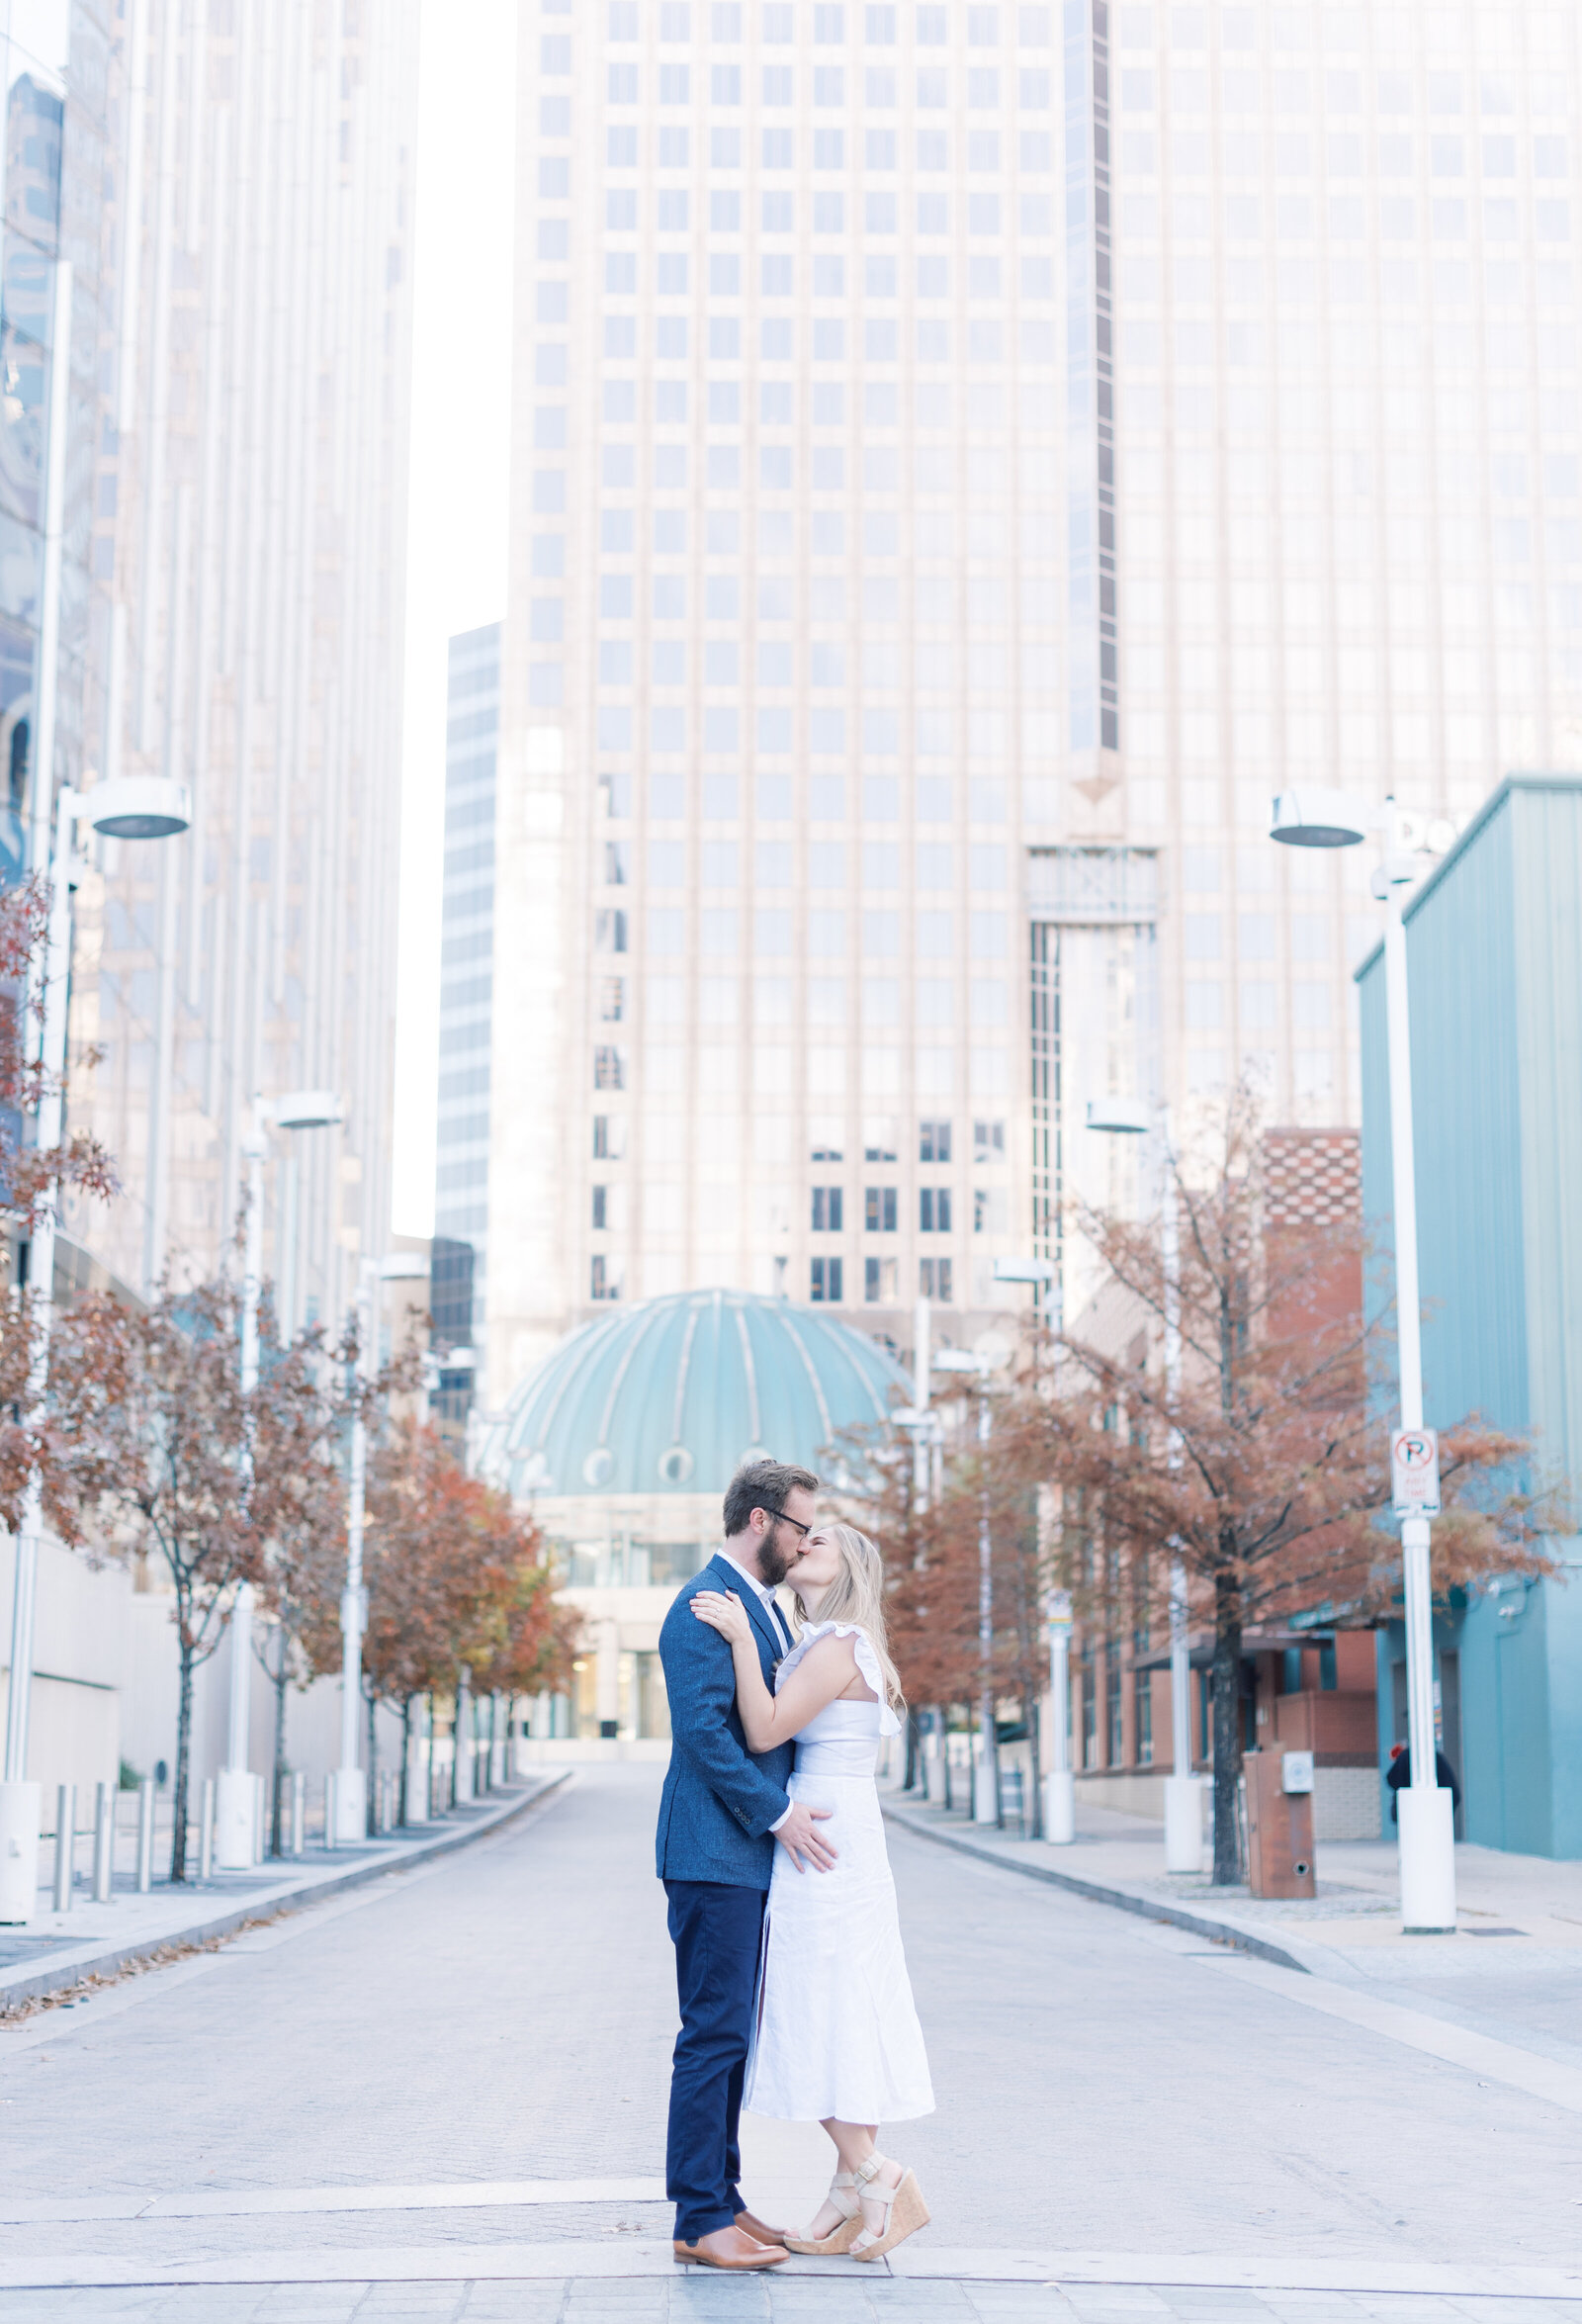 Portrait of a man in a blue suit and a woman in a white dress kissing and holding each other in front of city buildings